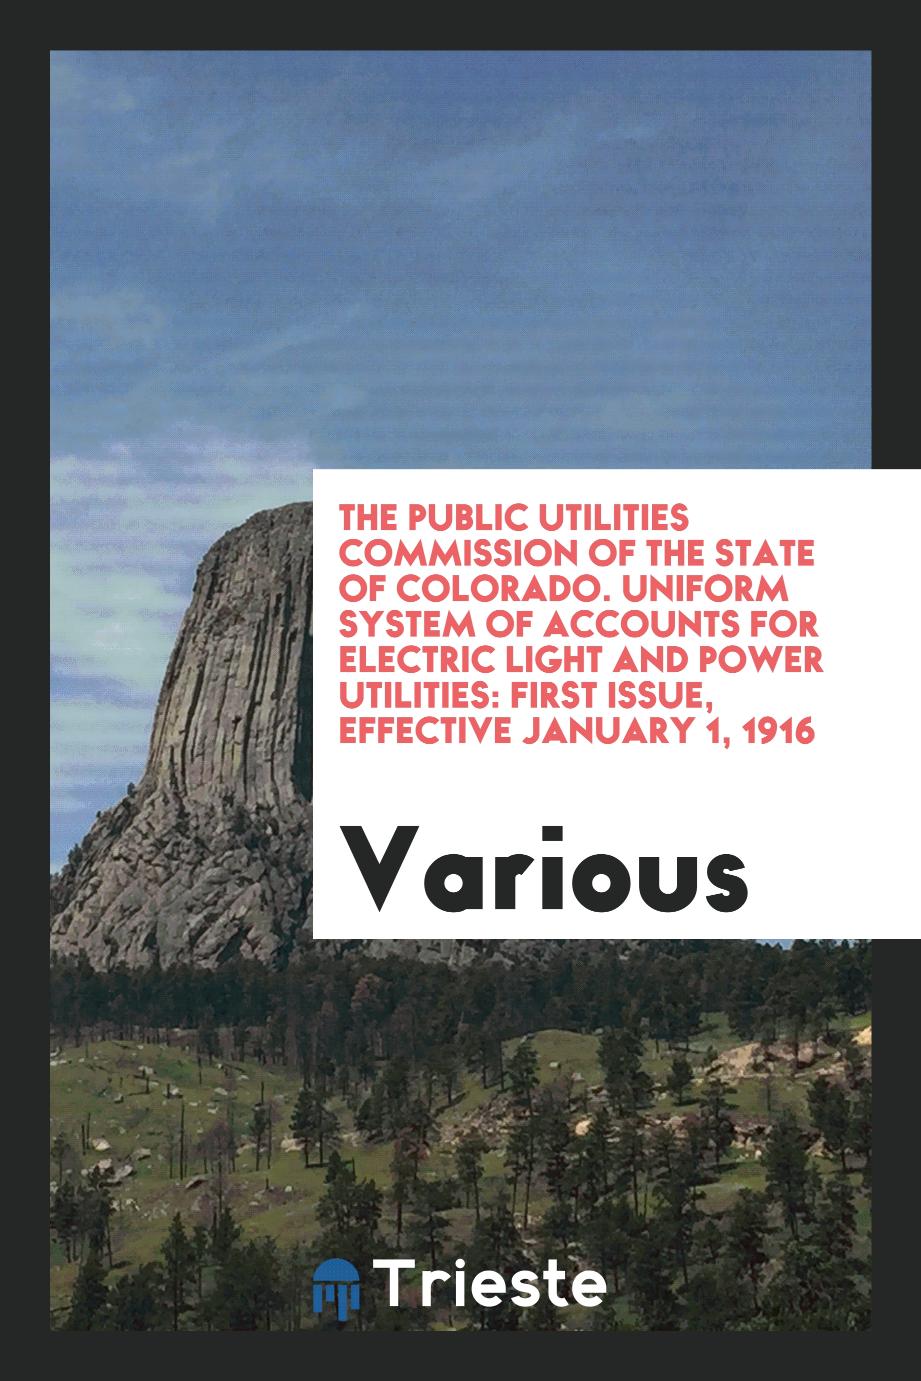 The public Utilities Commission of the State of Colorado. Uniform System of Accounts for Electric Light and Power Utilities: First Issue, Effective January 1, 1916